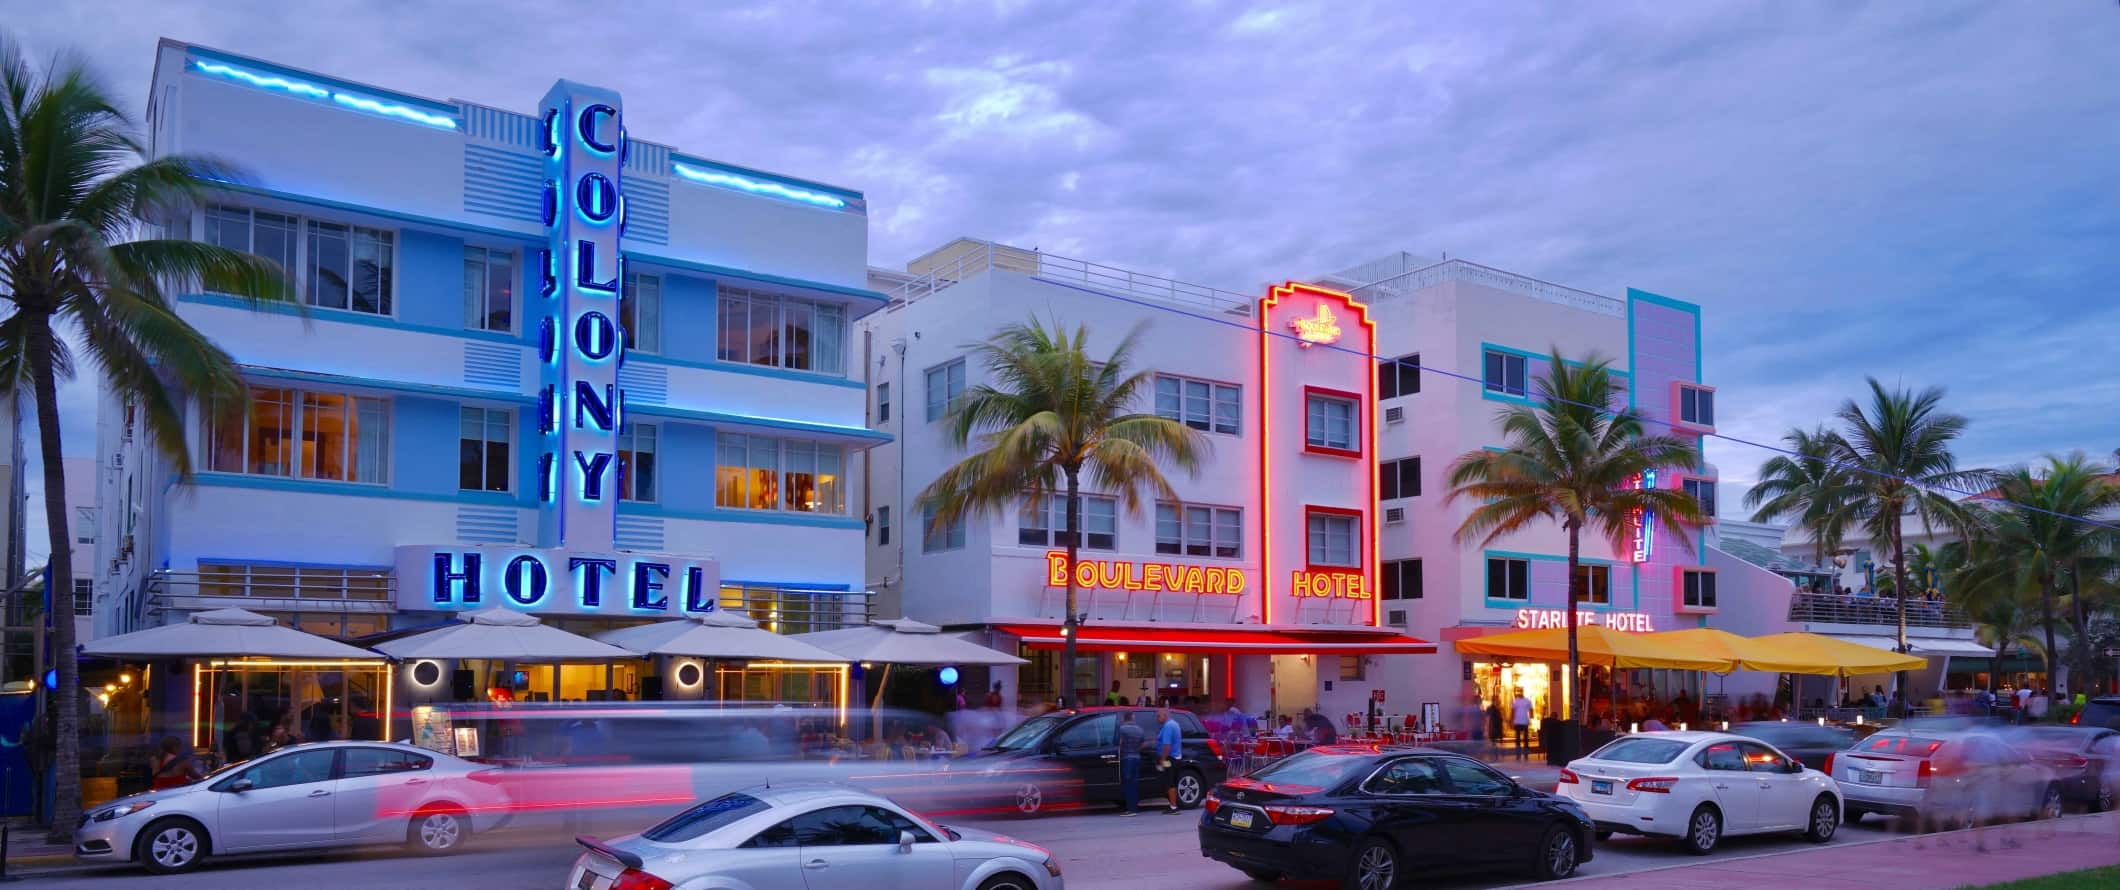 Art deco buildings lit up in neon lights at sunset in South Beach, Miami, Florida